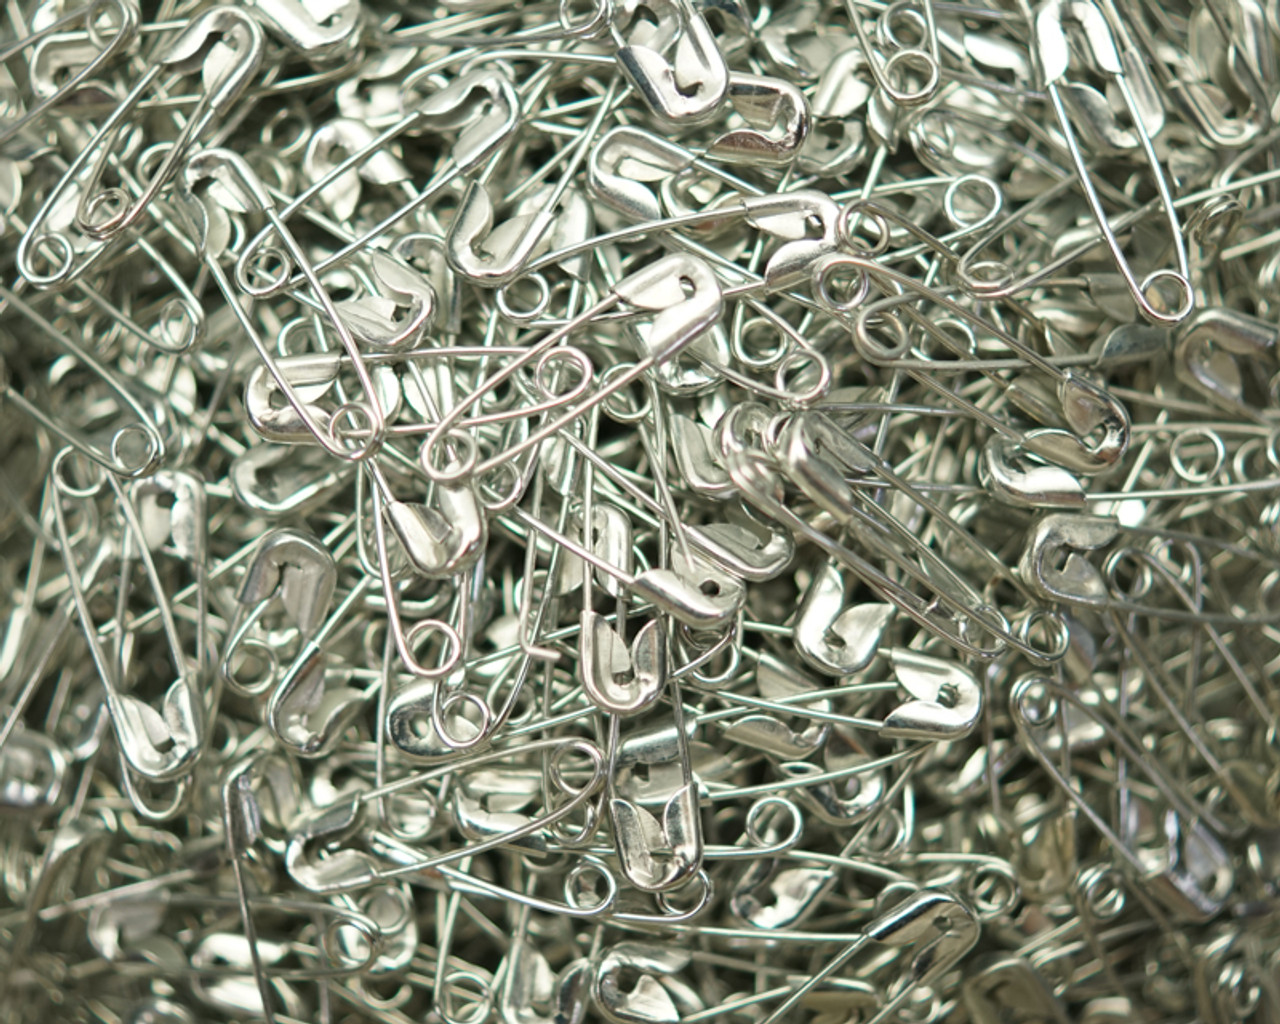 Wholesale Silver Safety Pins - 3/4 Small Safety Pins - Pack of